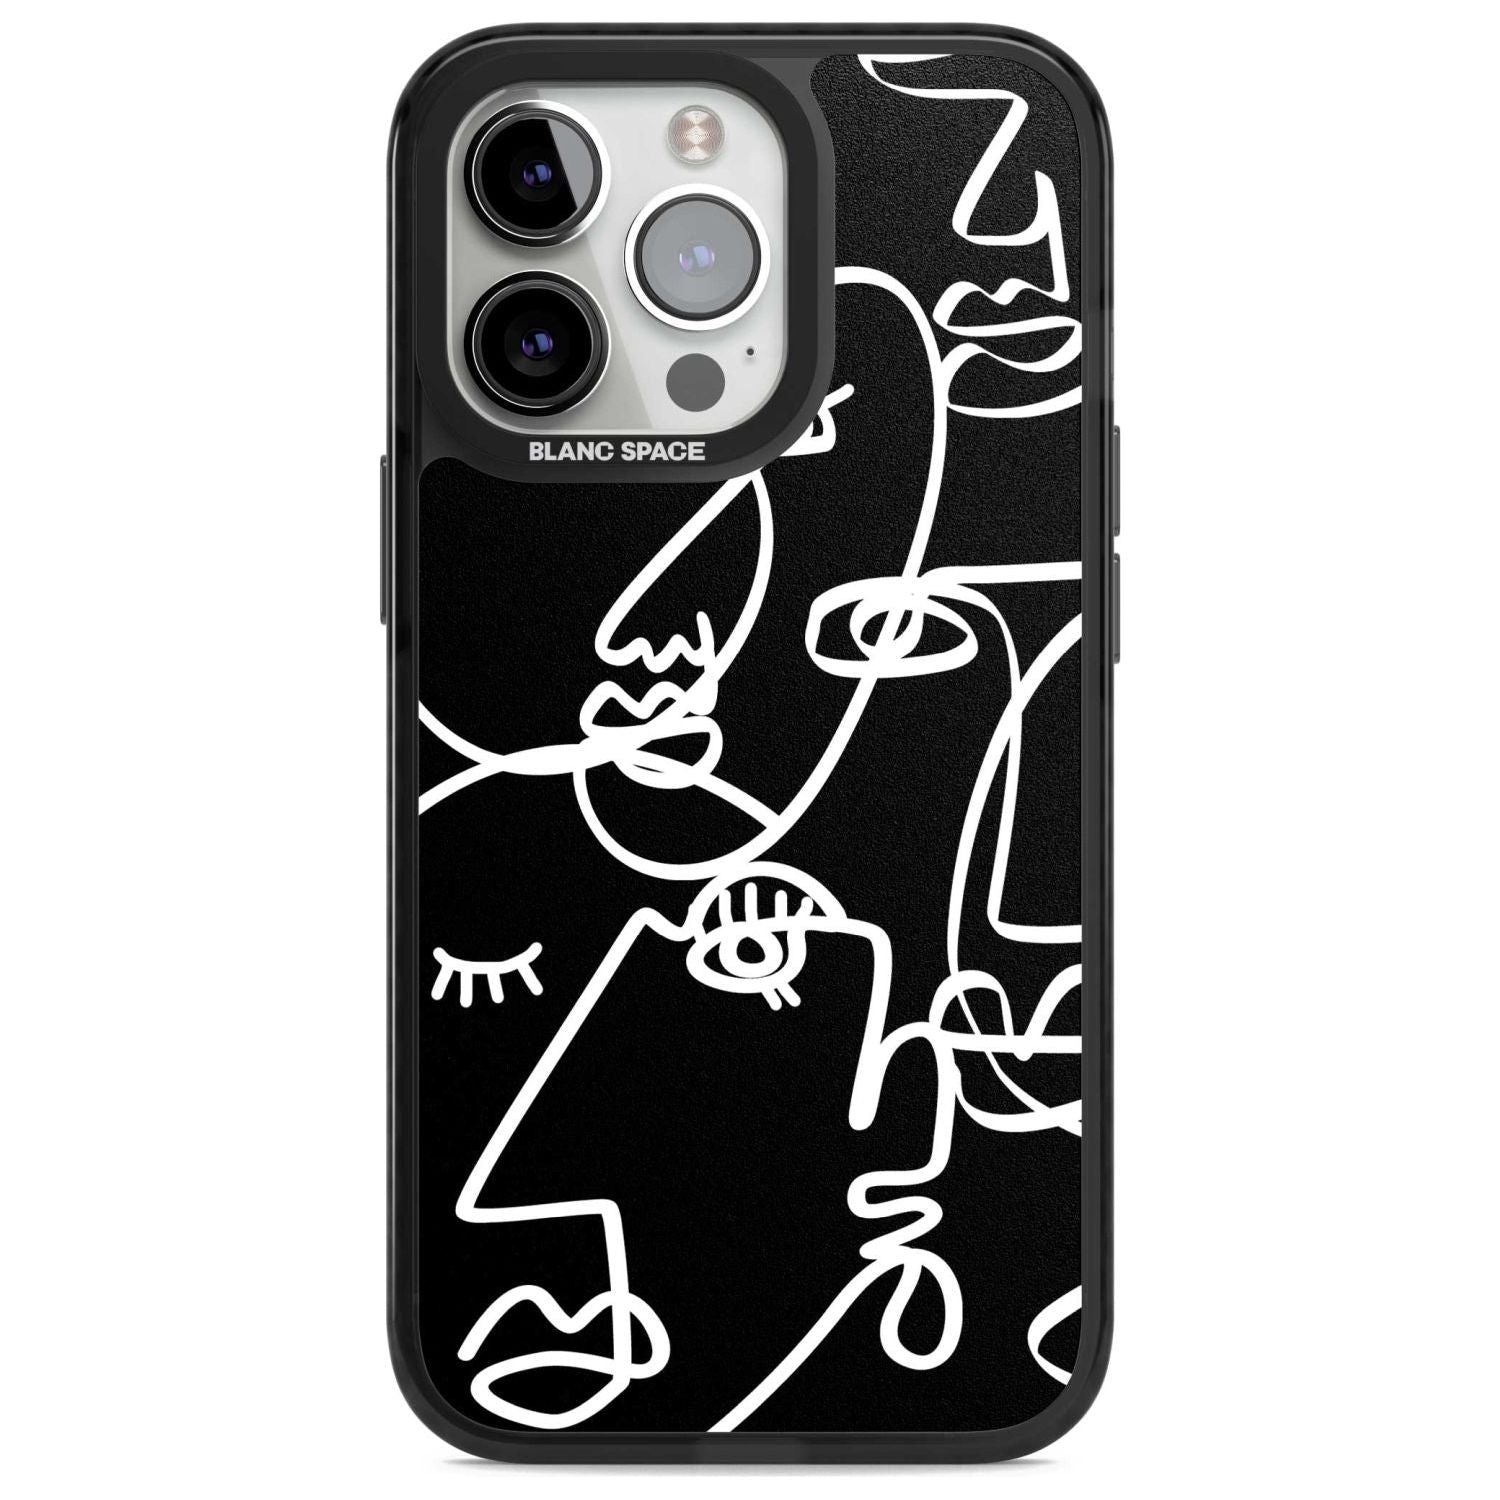 Abstract Continuous Line Faces White on Black Phone Case iPhone 15 Pro Max / Magsafe Black Impact Case,iPhone 15 Pro / Magsafe Black Impact Case,iPhone 14 Pro Max / Magsafe Black Impact Case,iPhone 14 Pro / Magsafe Black Impact Case,iPhone 13 Pro / Magsafe Black Impact Case Blanc Space